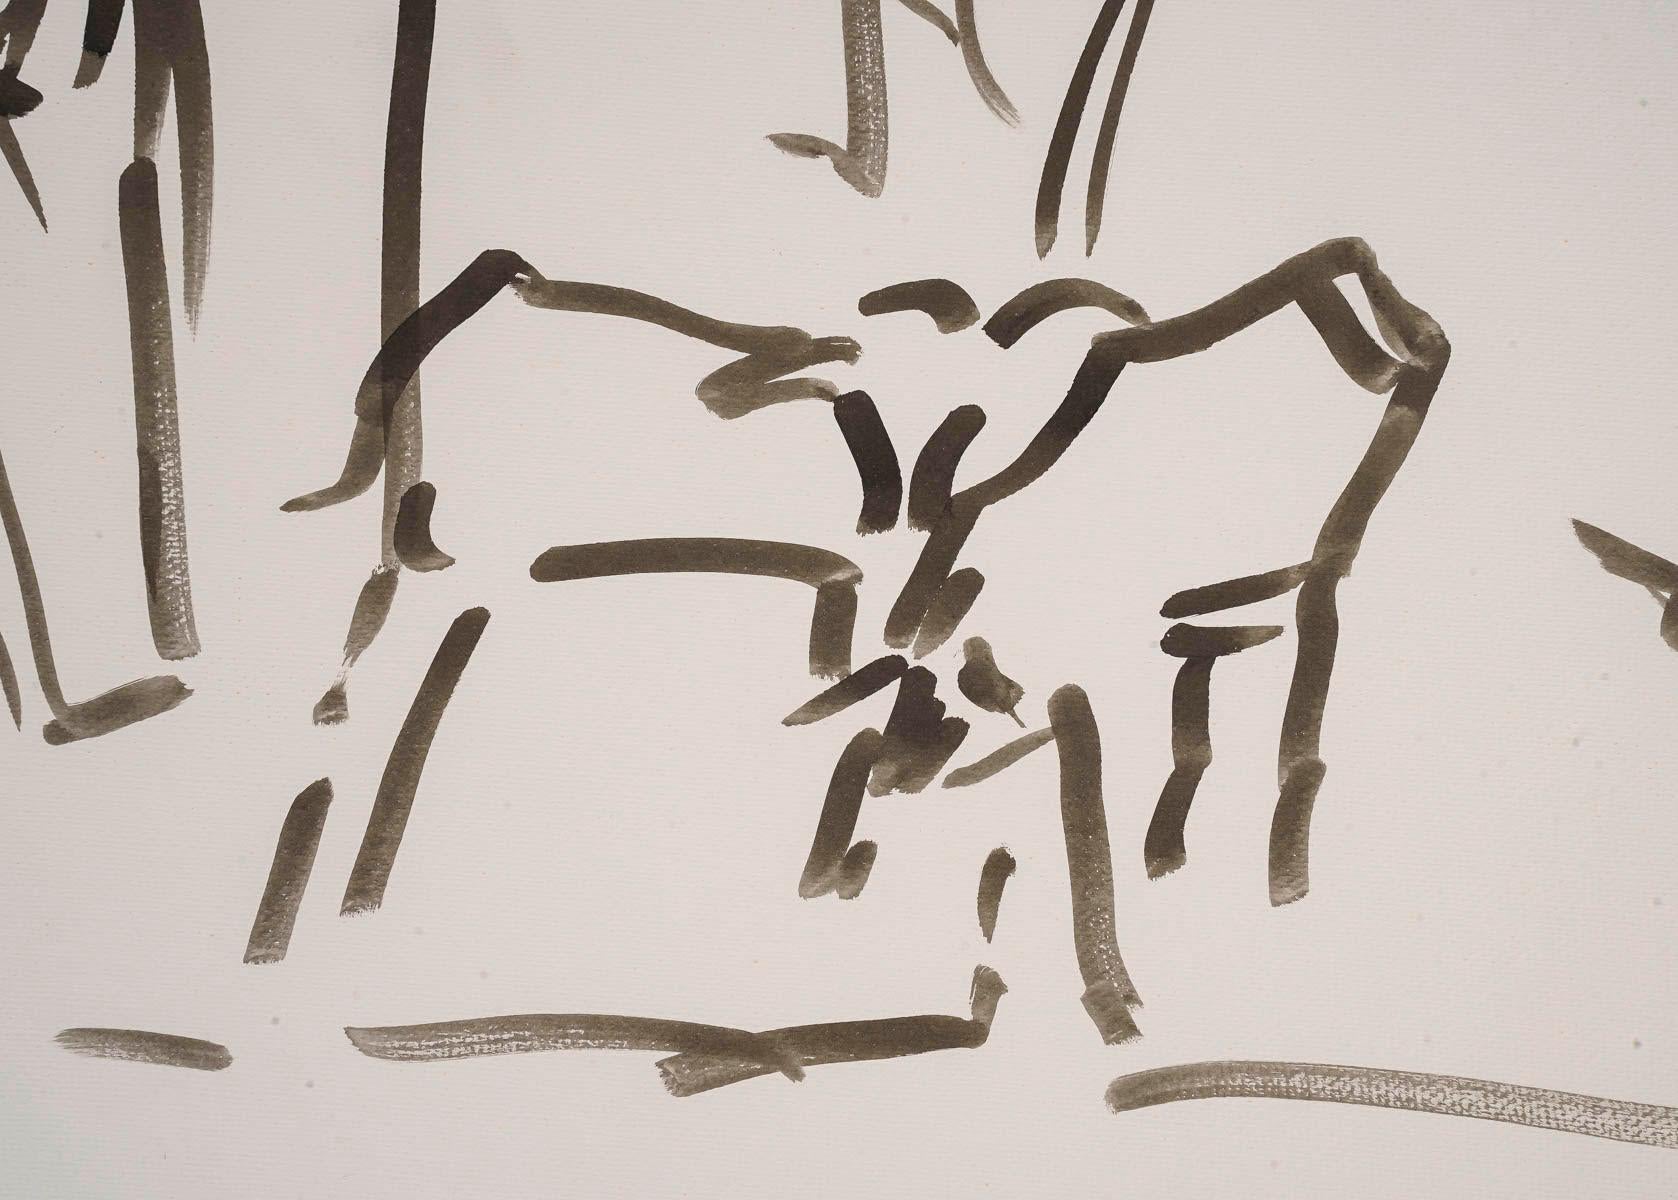 Wash drawing by artist Evelyne Luez on paper, 20th century.

Drawing by the artist Evelyne Luez on paper in wash, representing a meeting of men with hats, 20th century.
H: 42cm, W: 59cm, D: 0,3cm